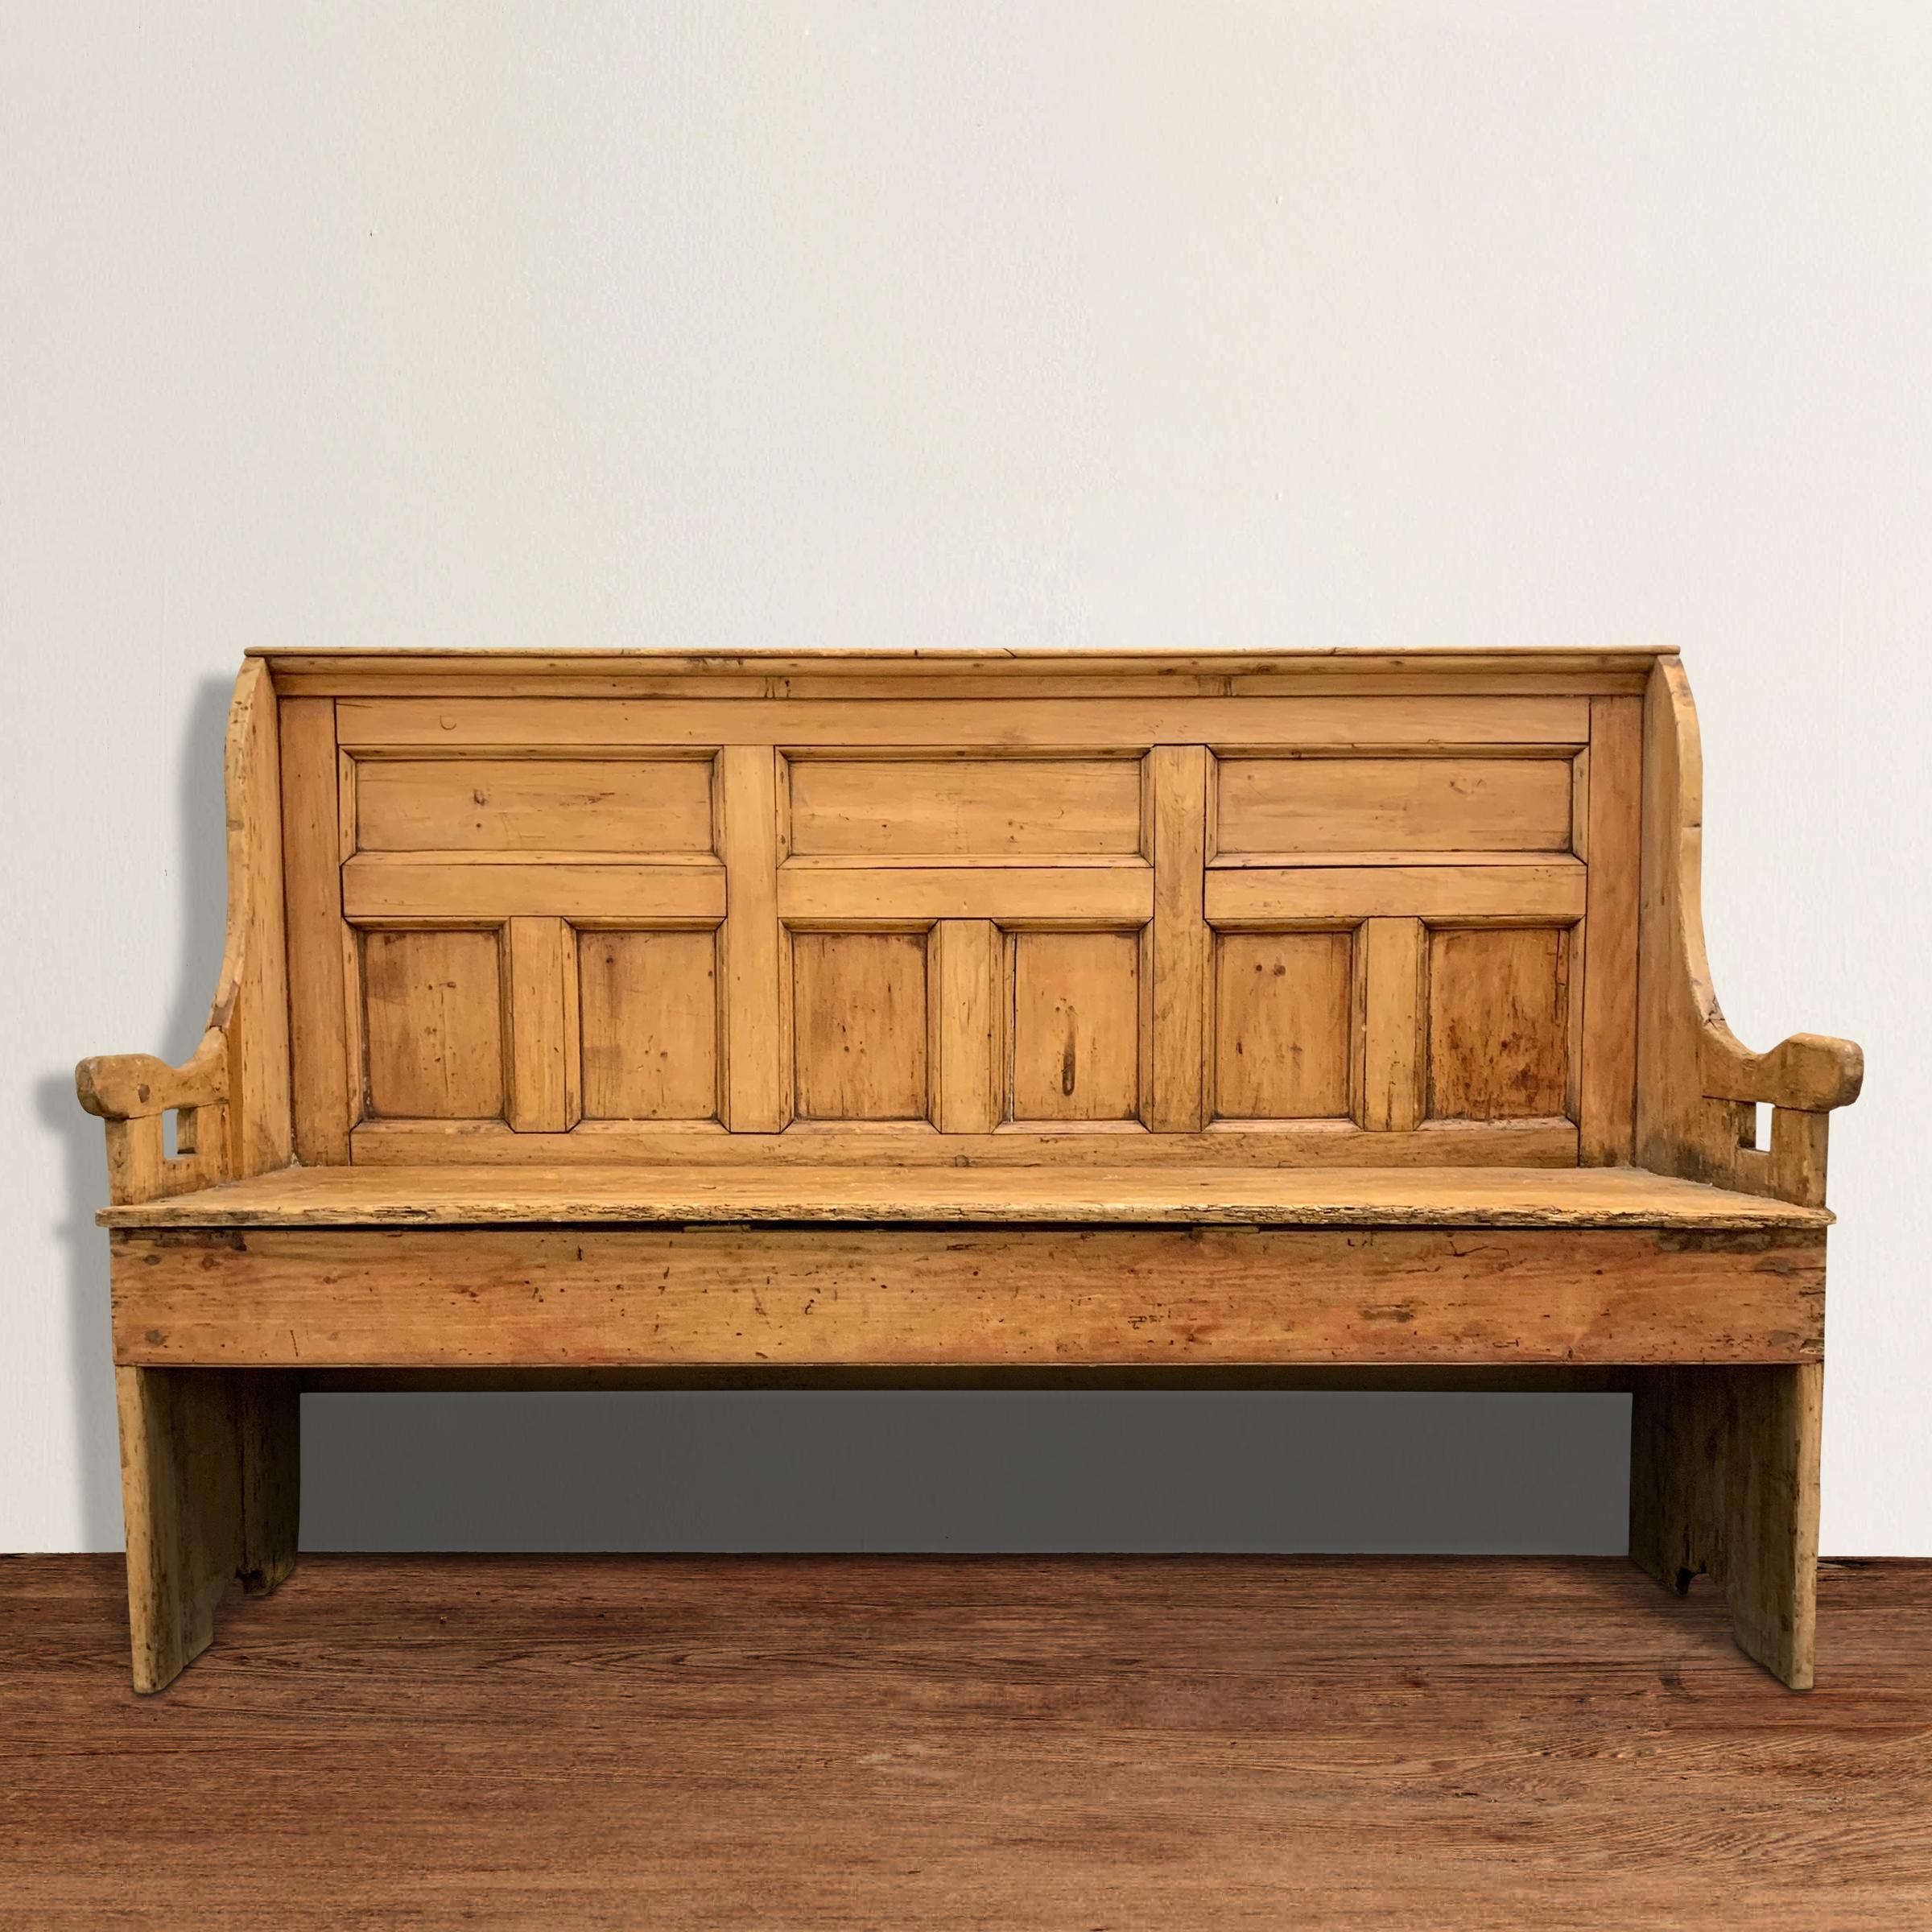 A charming 18th century English pine settle with a tall paneled back, a generous deep seat, and quirky arms with a well-worn finish bestowed from over two hundred years of use.